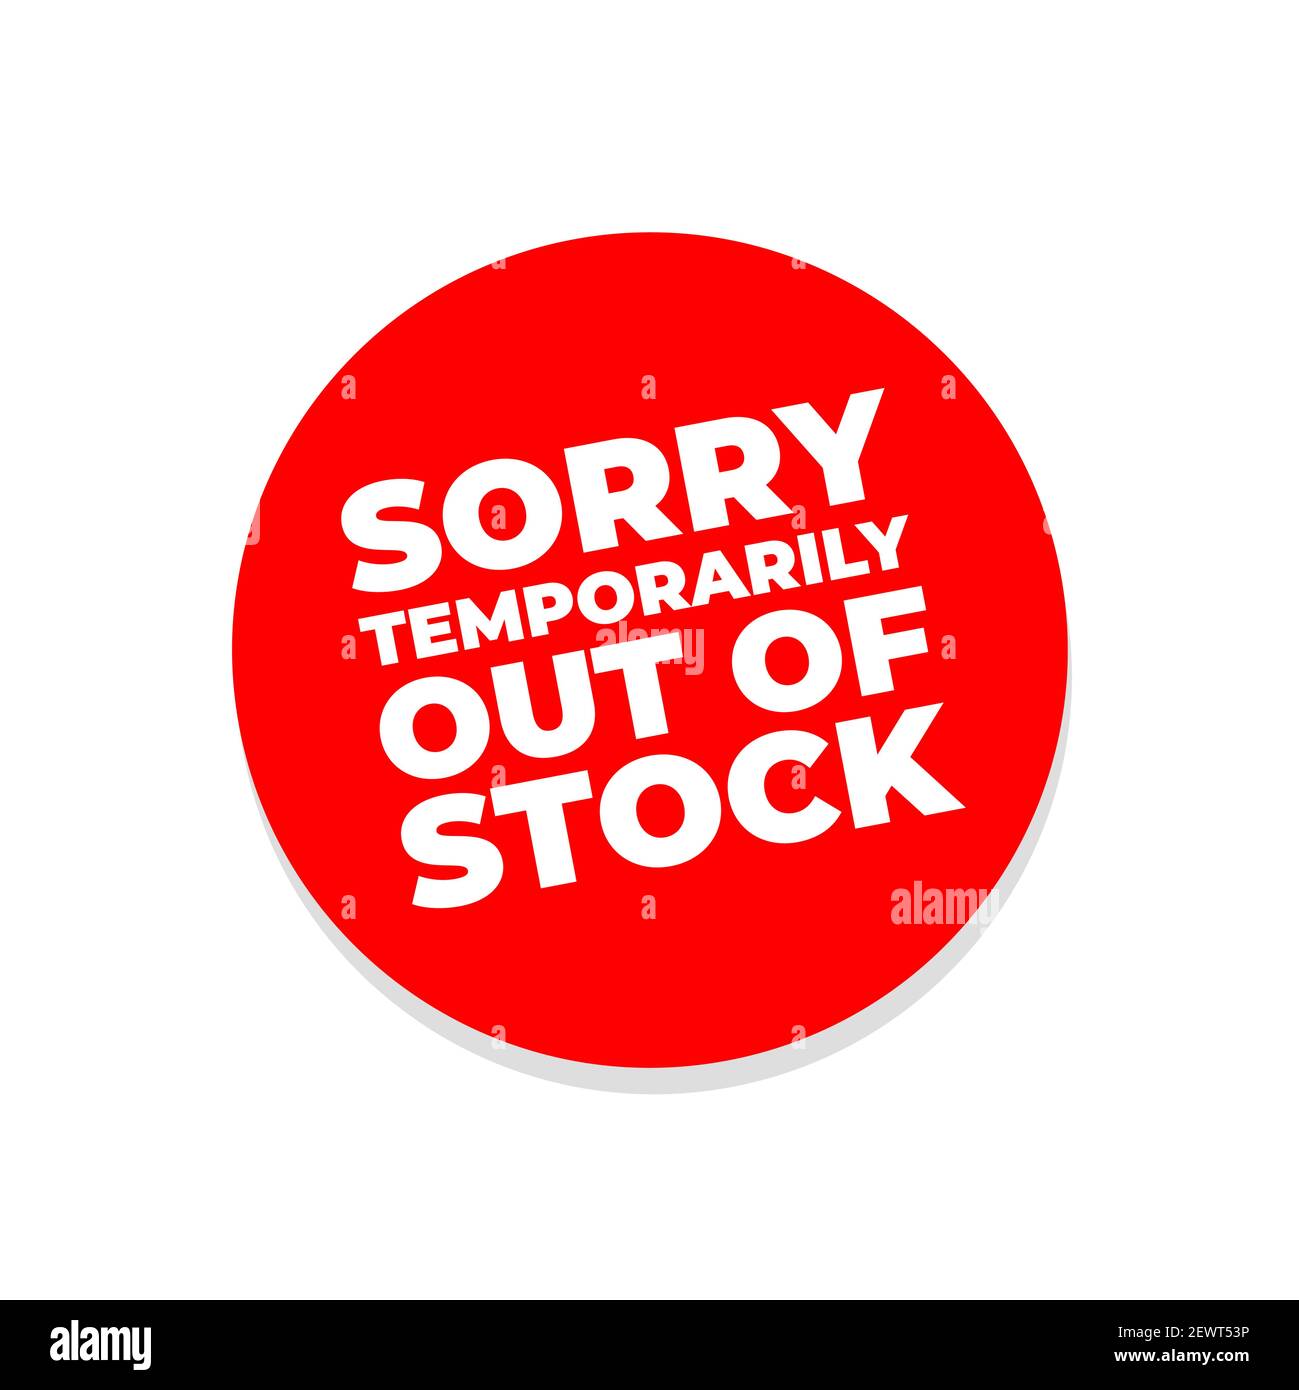 Sorry temporarily out of stock sign. Stock Vector